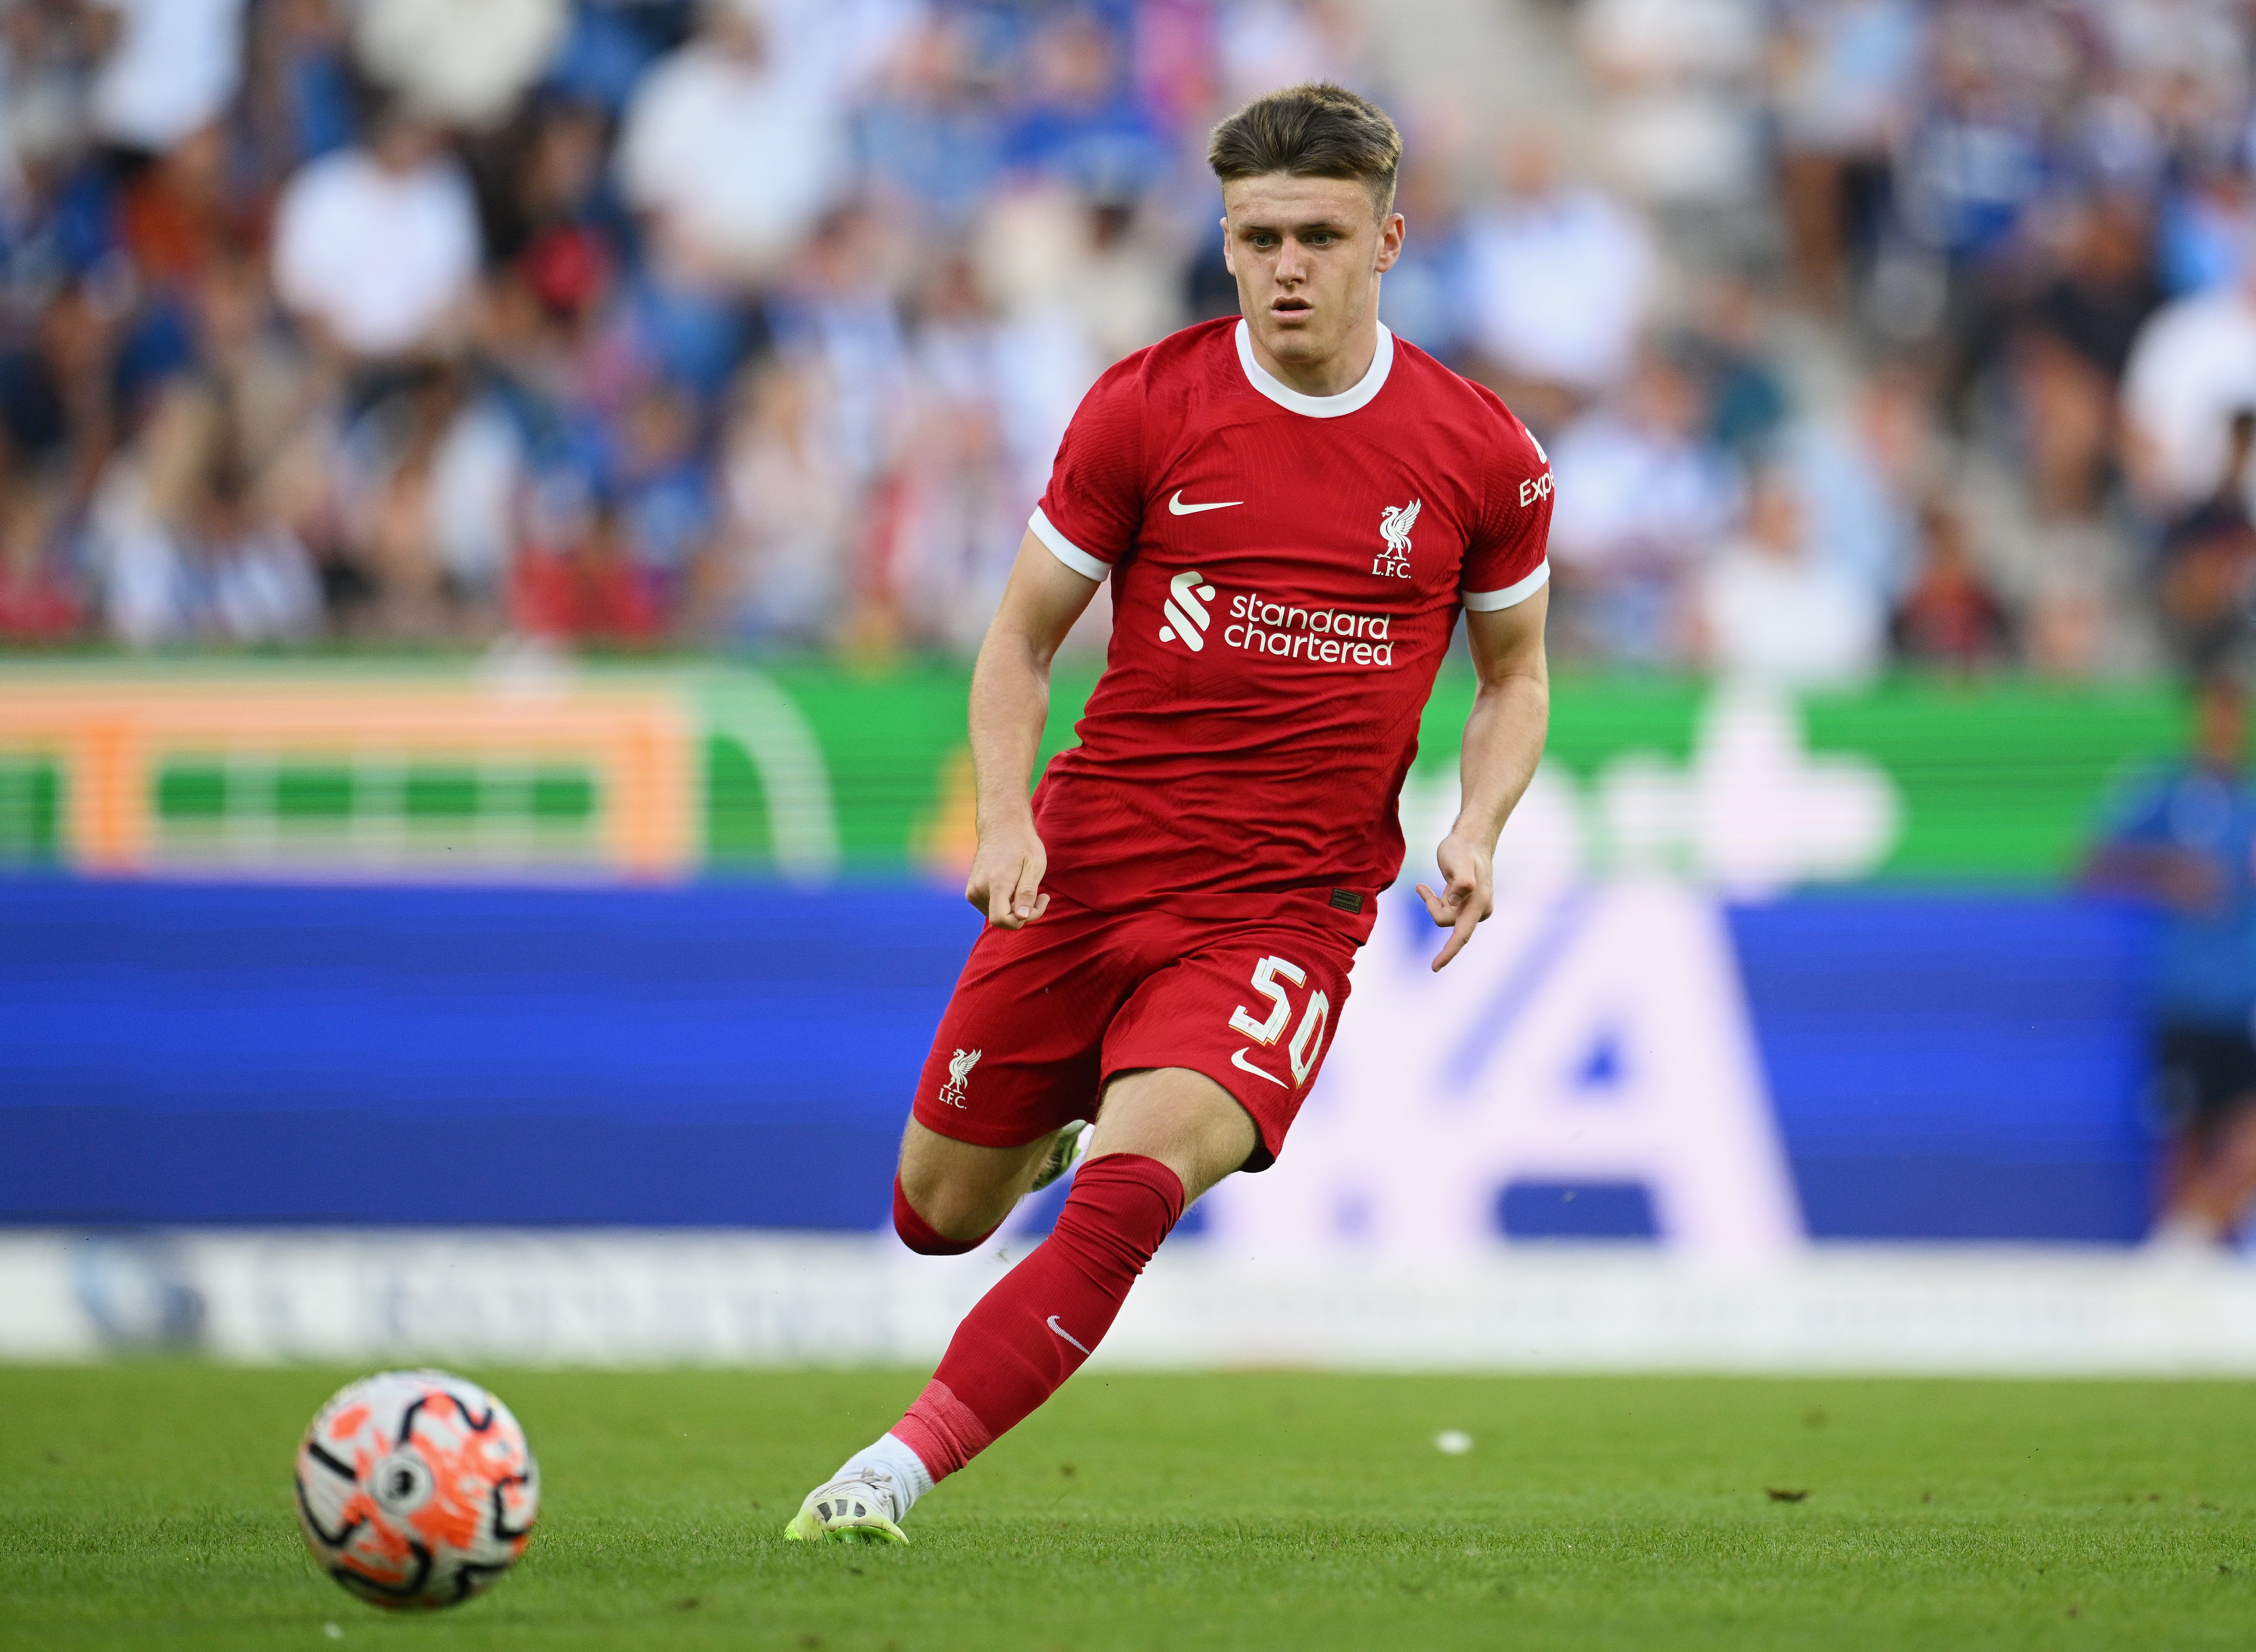 Liverpool youngster Ben Doak has been included in Scotland’s 28-man provisional Euros squad